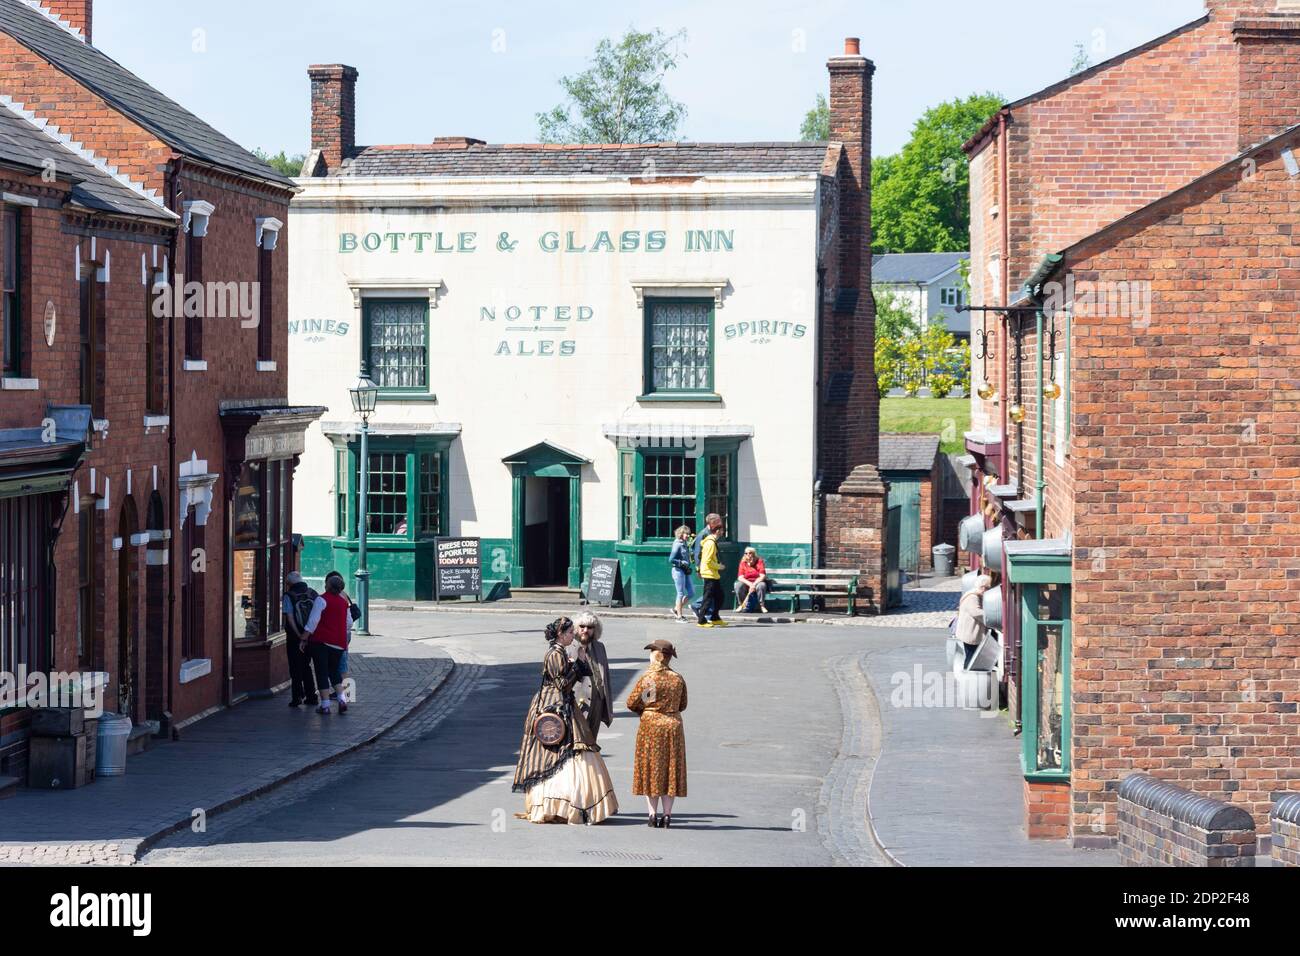 Il flacone di vetro & Inn, Canal Street, Black Country Living Museum, Dudley, West Midlands, England, Regno Unito Foto Stock